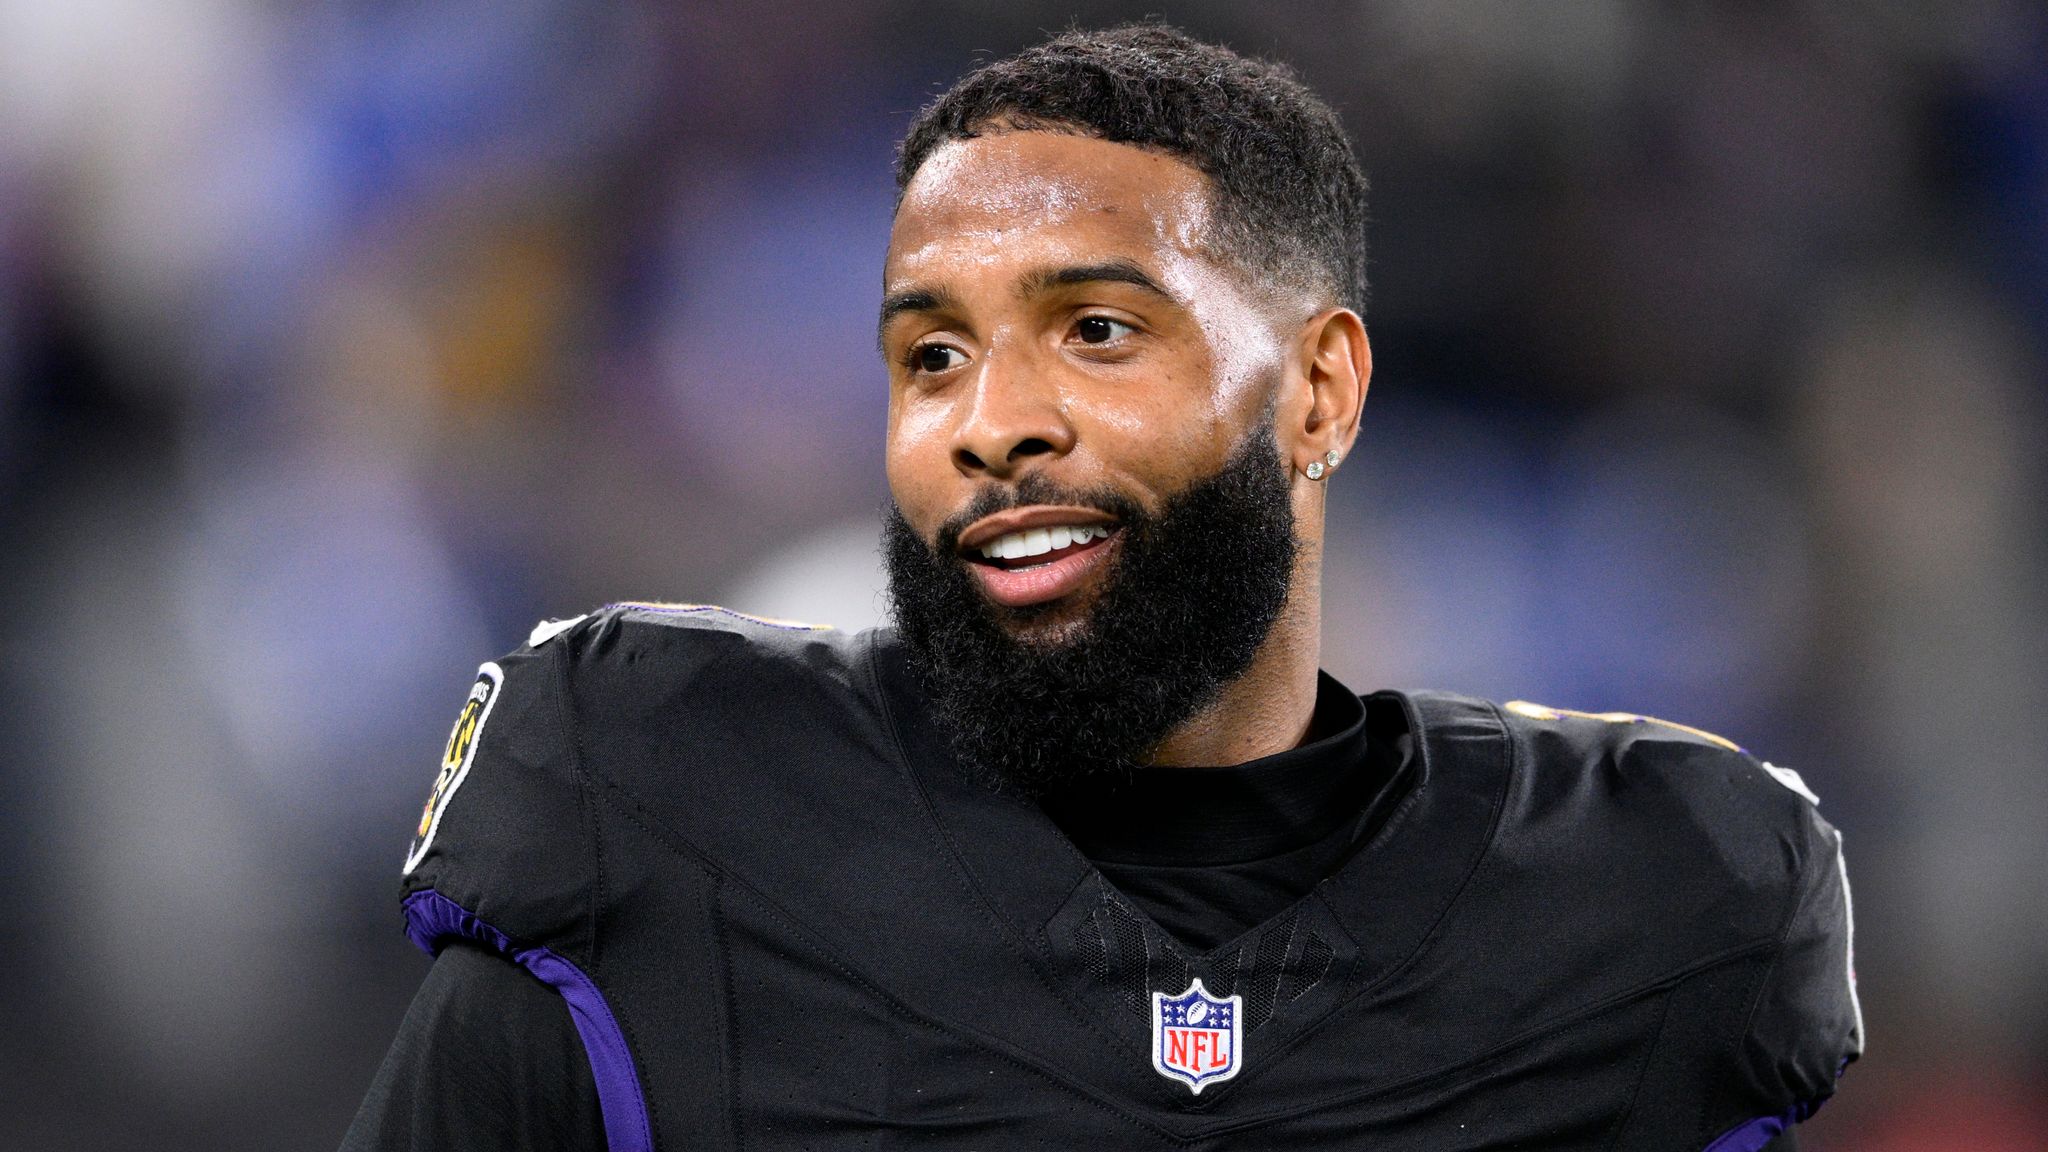 Odell Beckham Jr: Miami Dolphins to sign three-time Pro Bowl wide receiver  | NFL News | Sky Sports